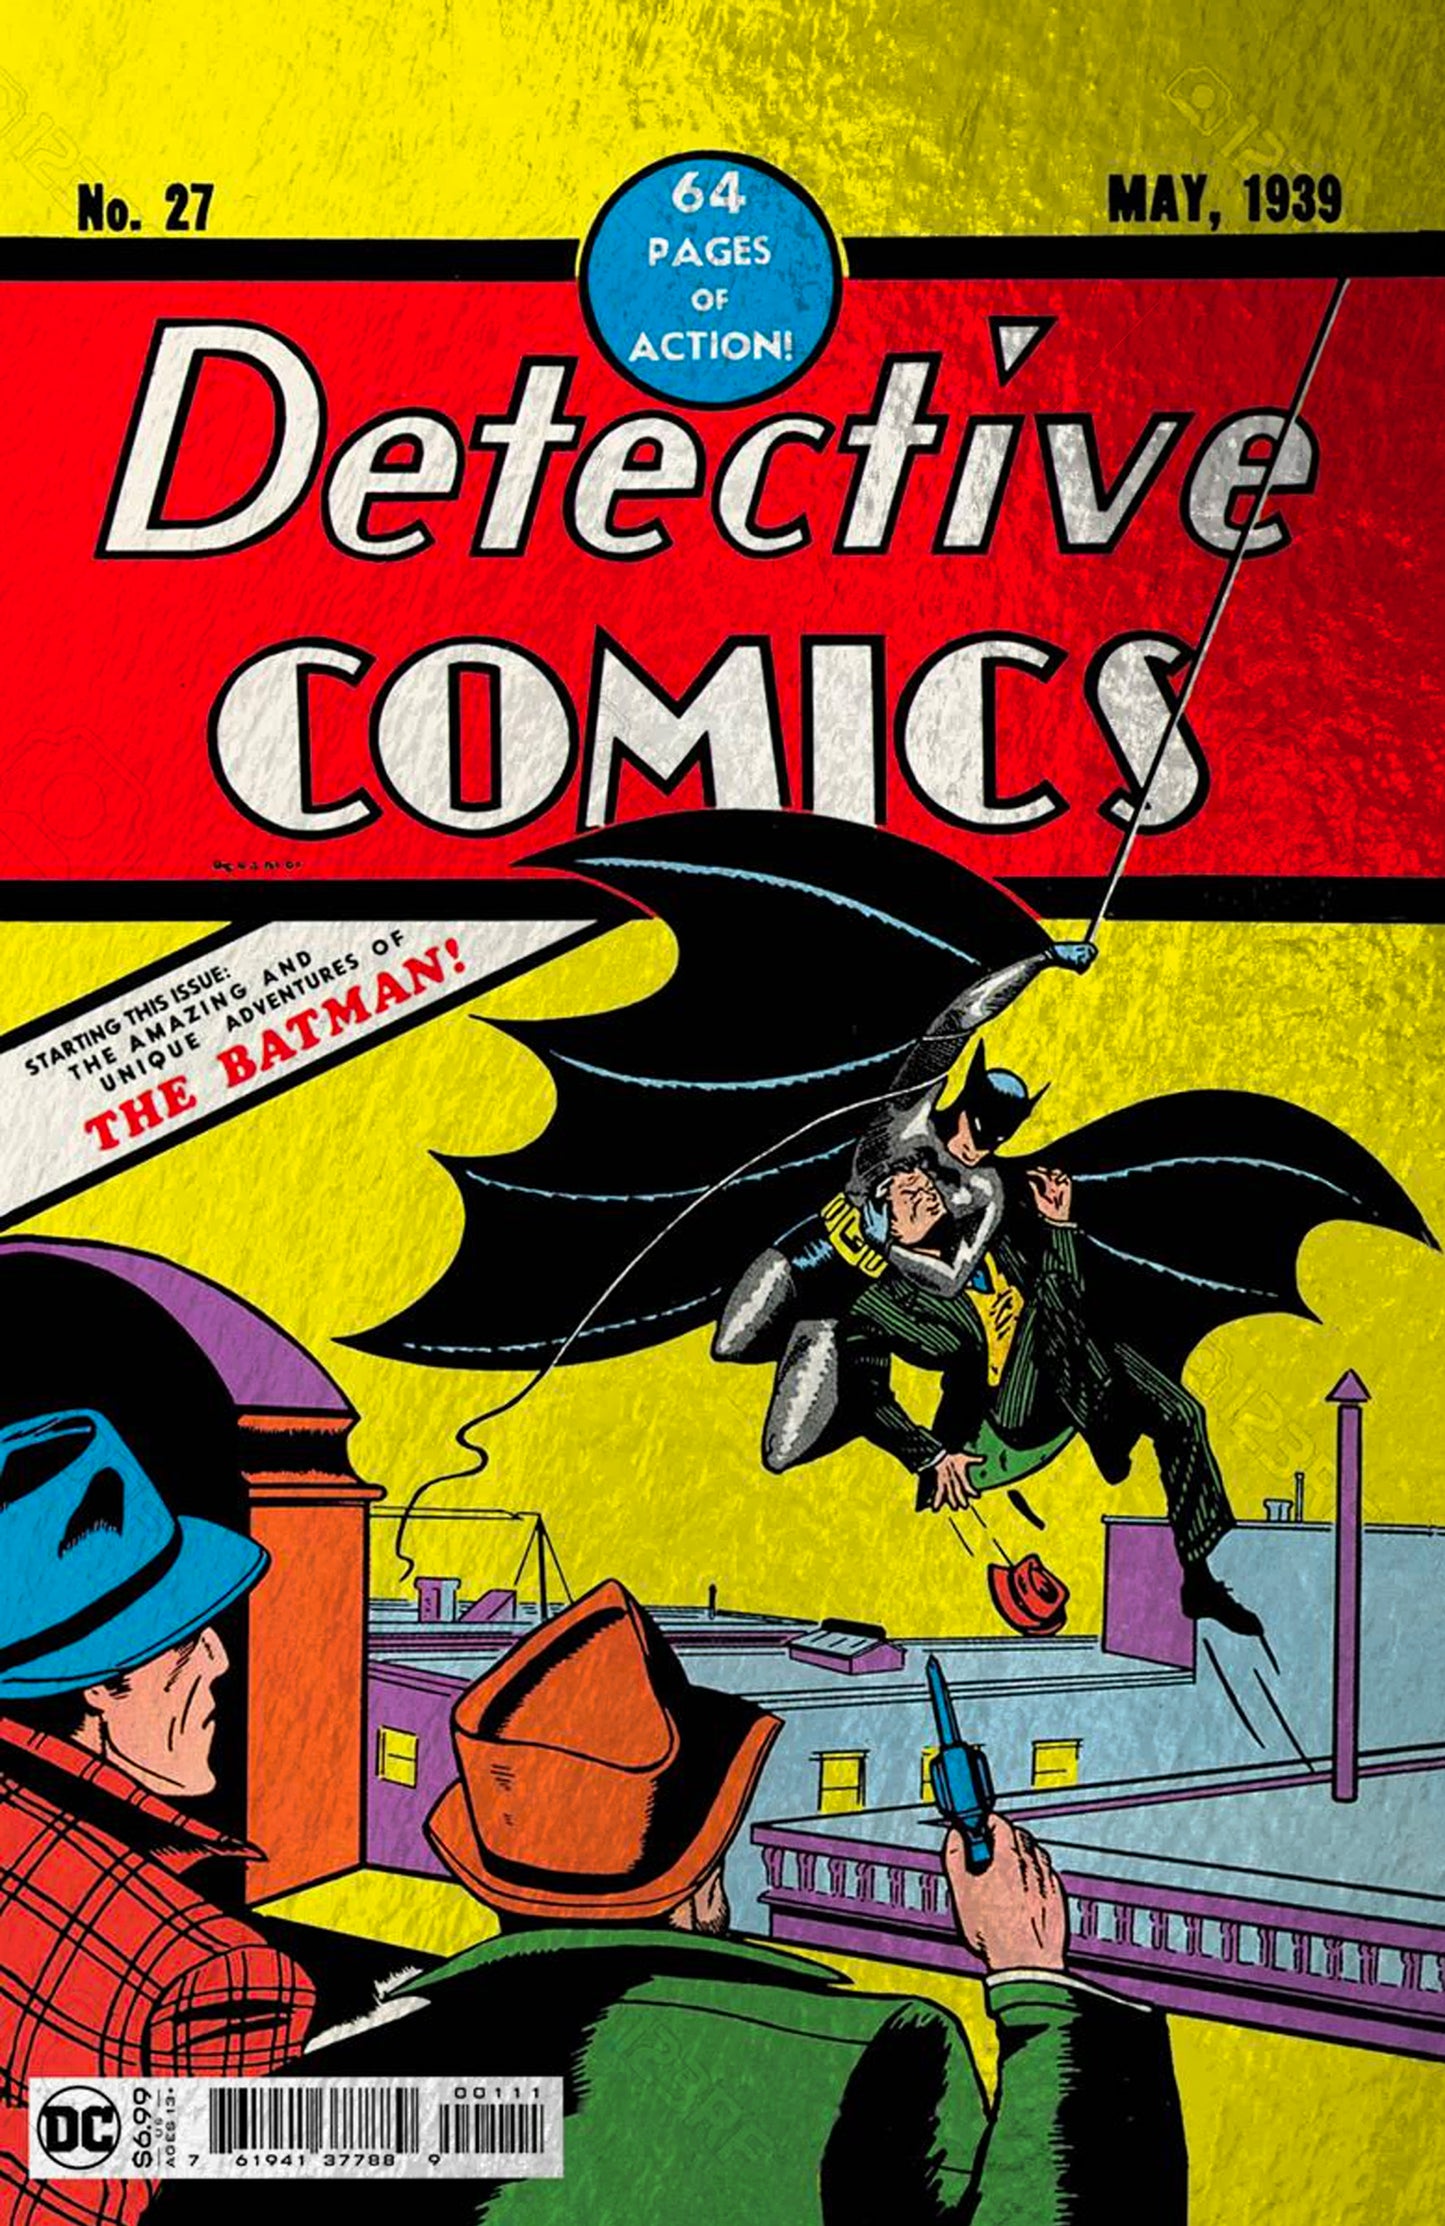 DETECTIVE COMICS #27 FACSIMILE NYCC 2022 FOIL VARIANT LIMITED TO 1500 COPIES - RAW & CGC